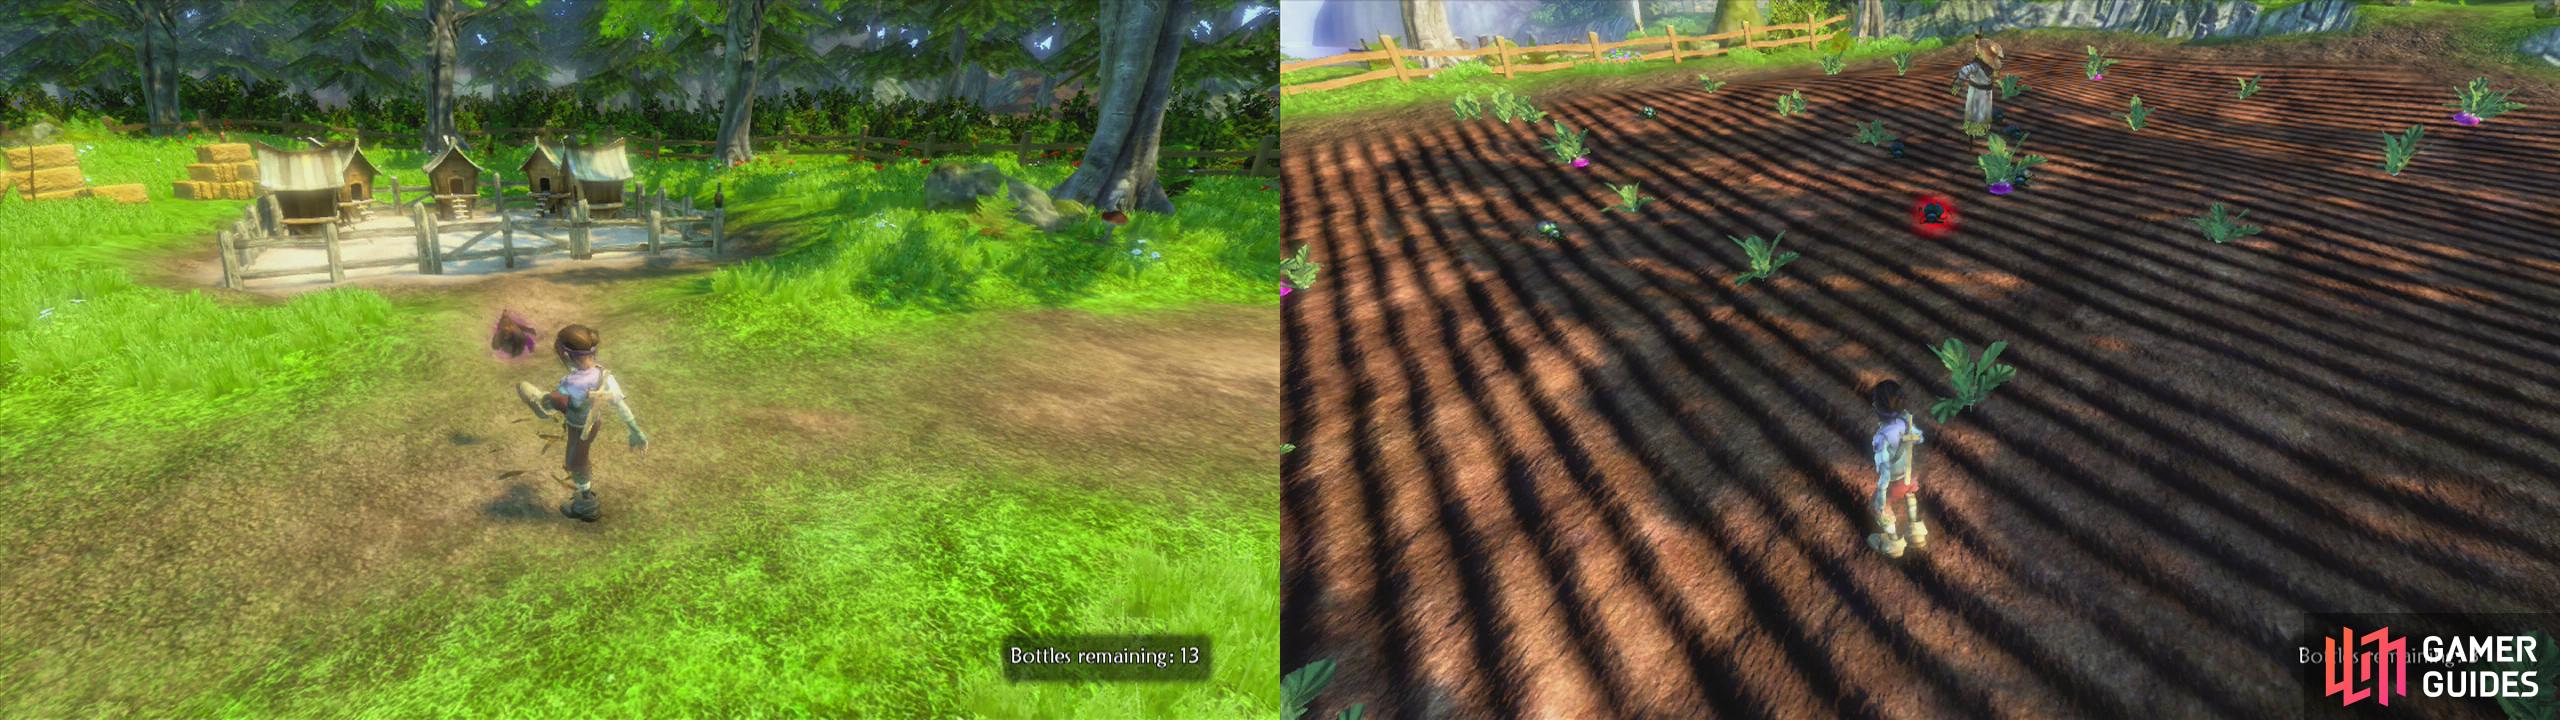 Don’t forget to kick the chickens into the pen (left) and kill the beetles in the field (right).